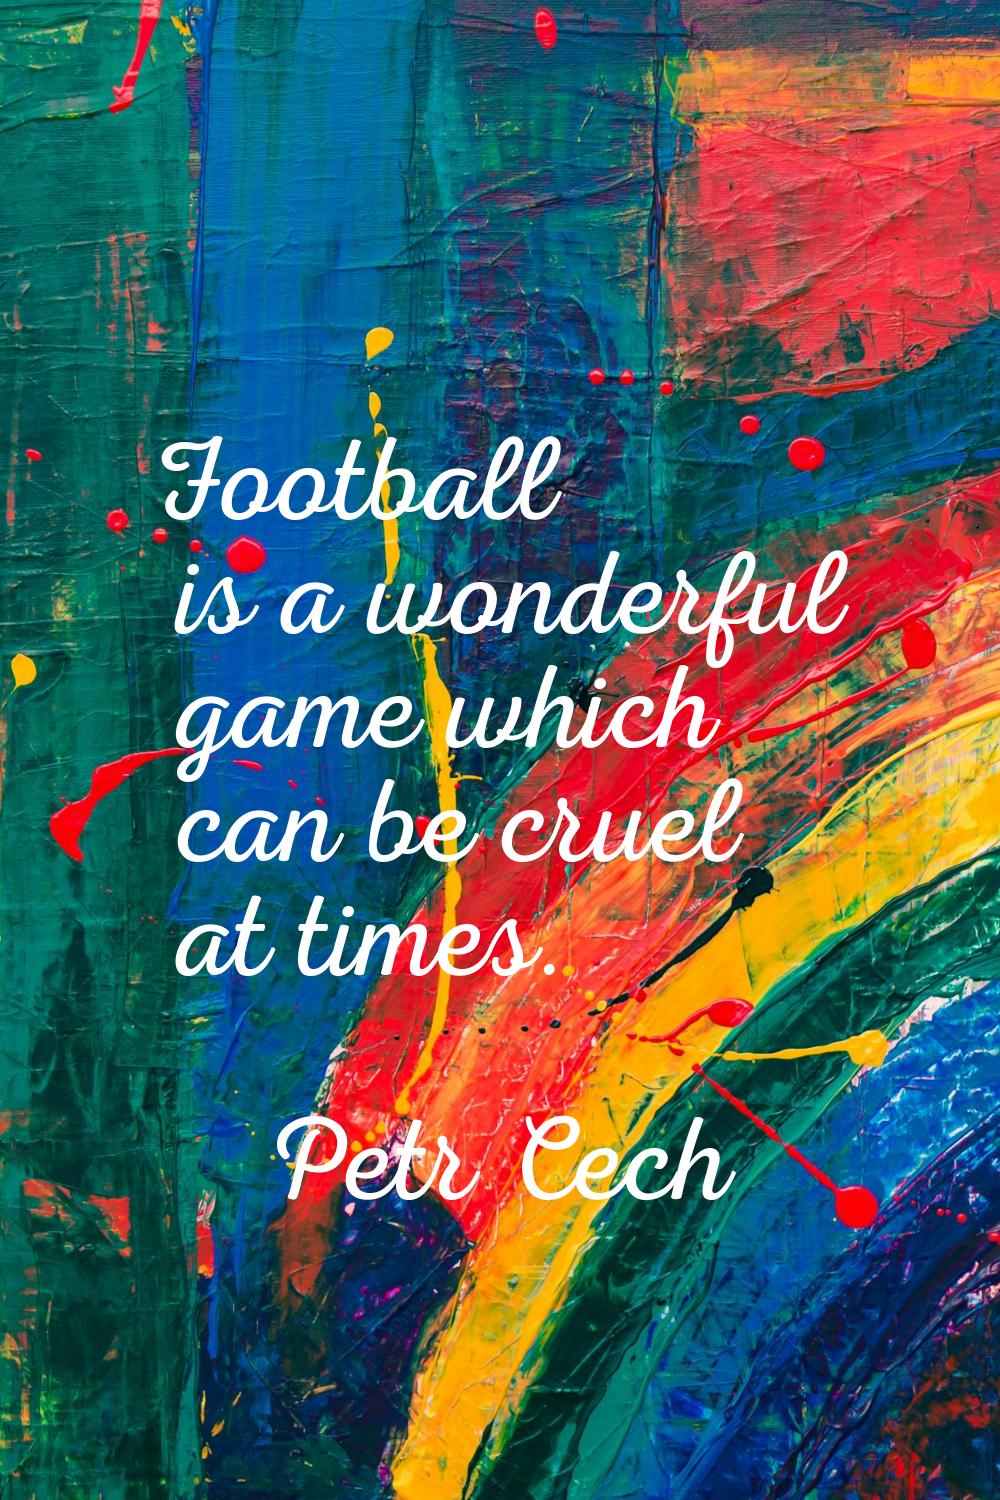 Football is a wonderful game which can be cruel at times.